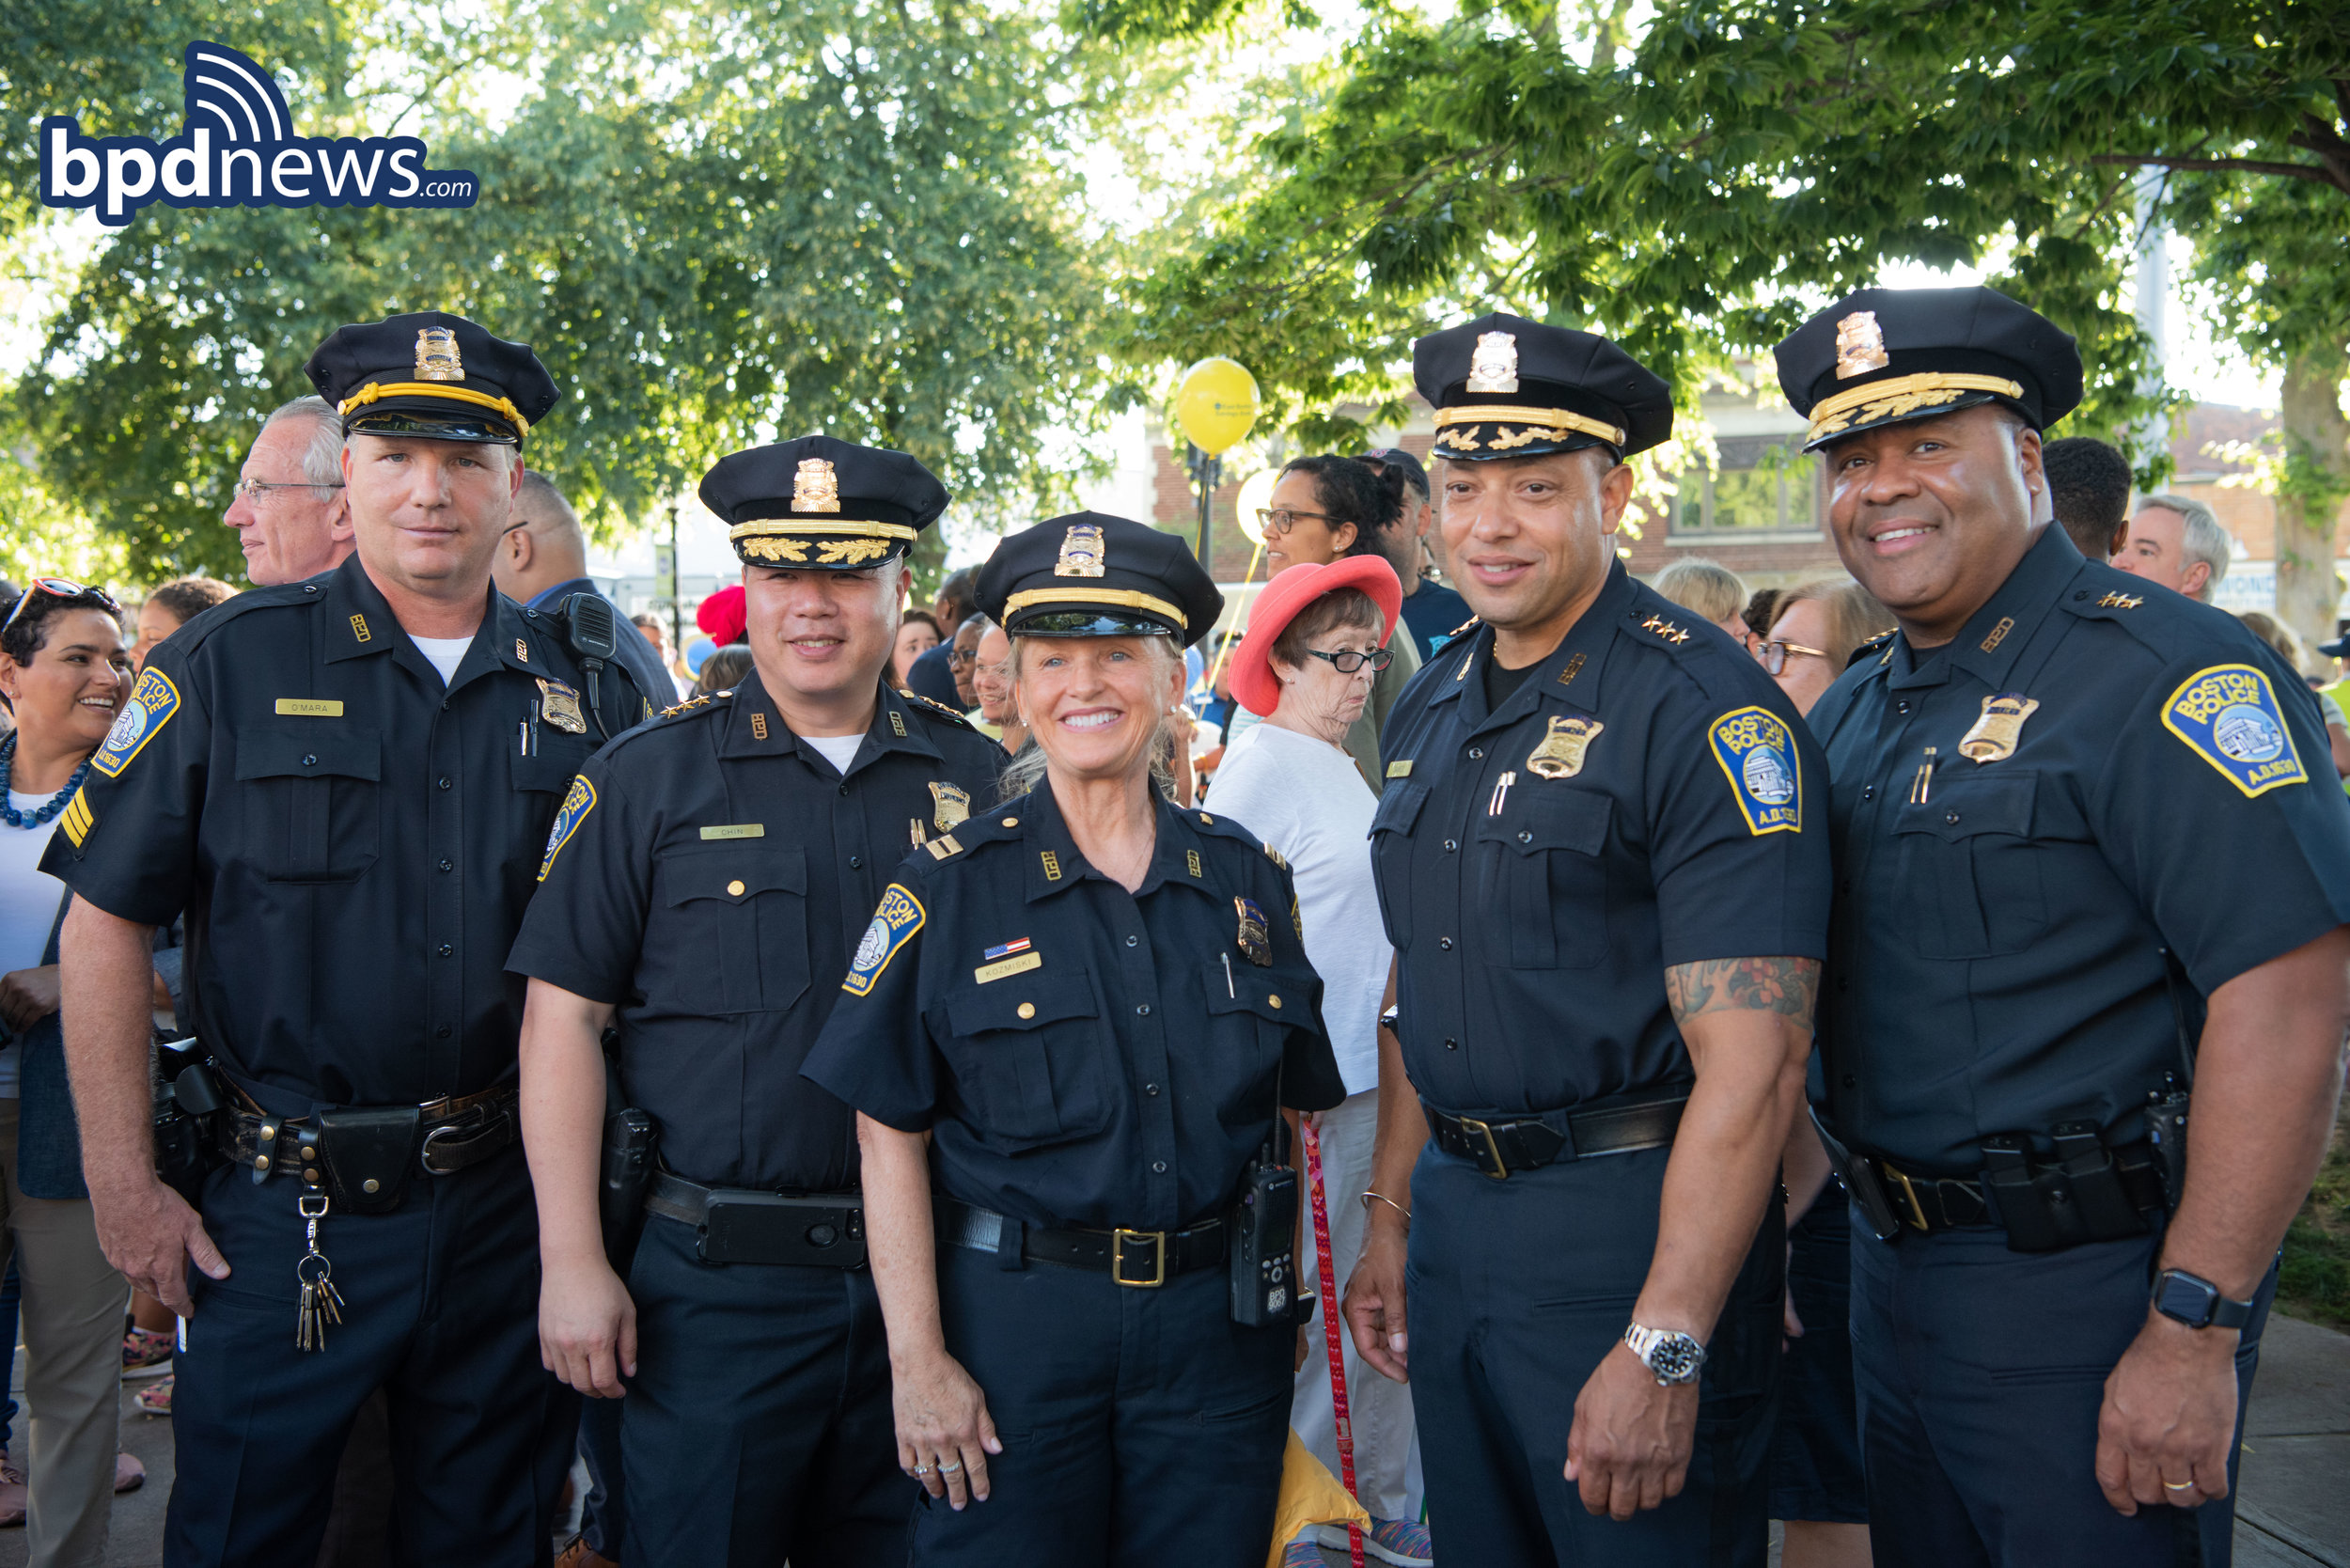 Bpd Photos Of The Day National Night Out 2019 —